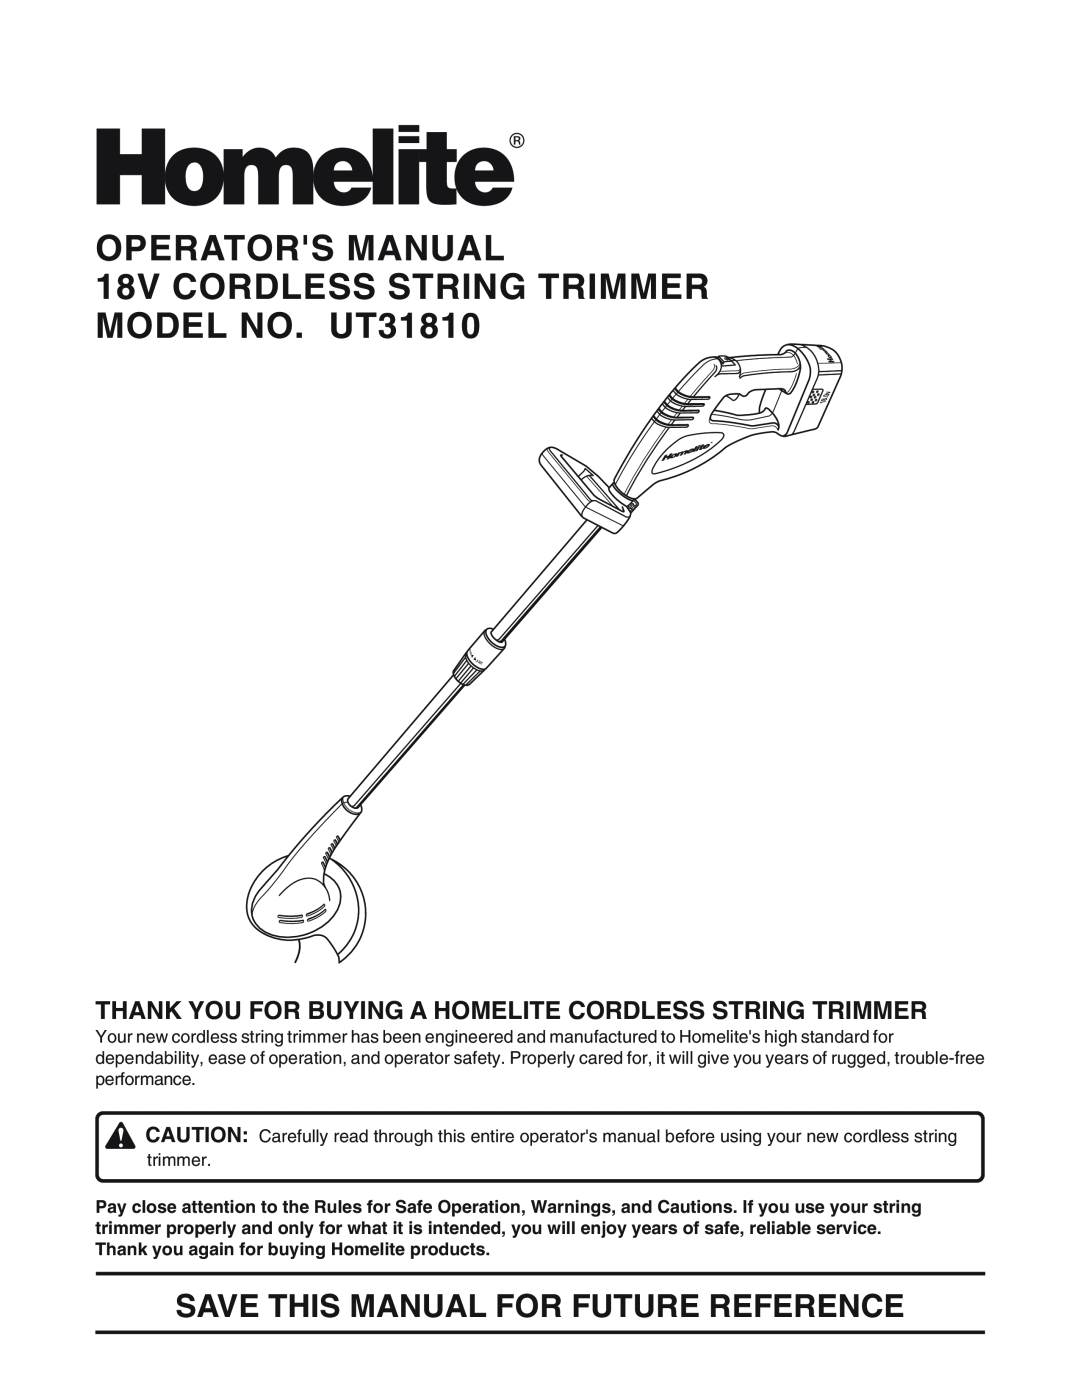 Homelite manual OPERATORS MANUAL 18V CORDLESS STRING TRIMMER MODEL NO. UT31810, Save This Manual For Future Reference 